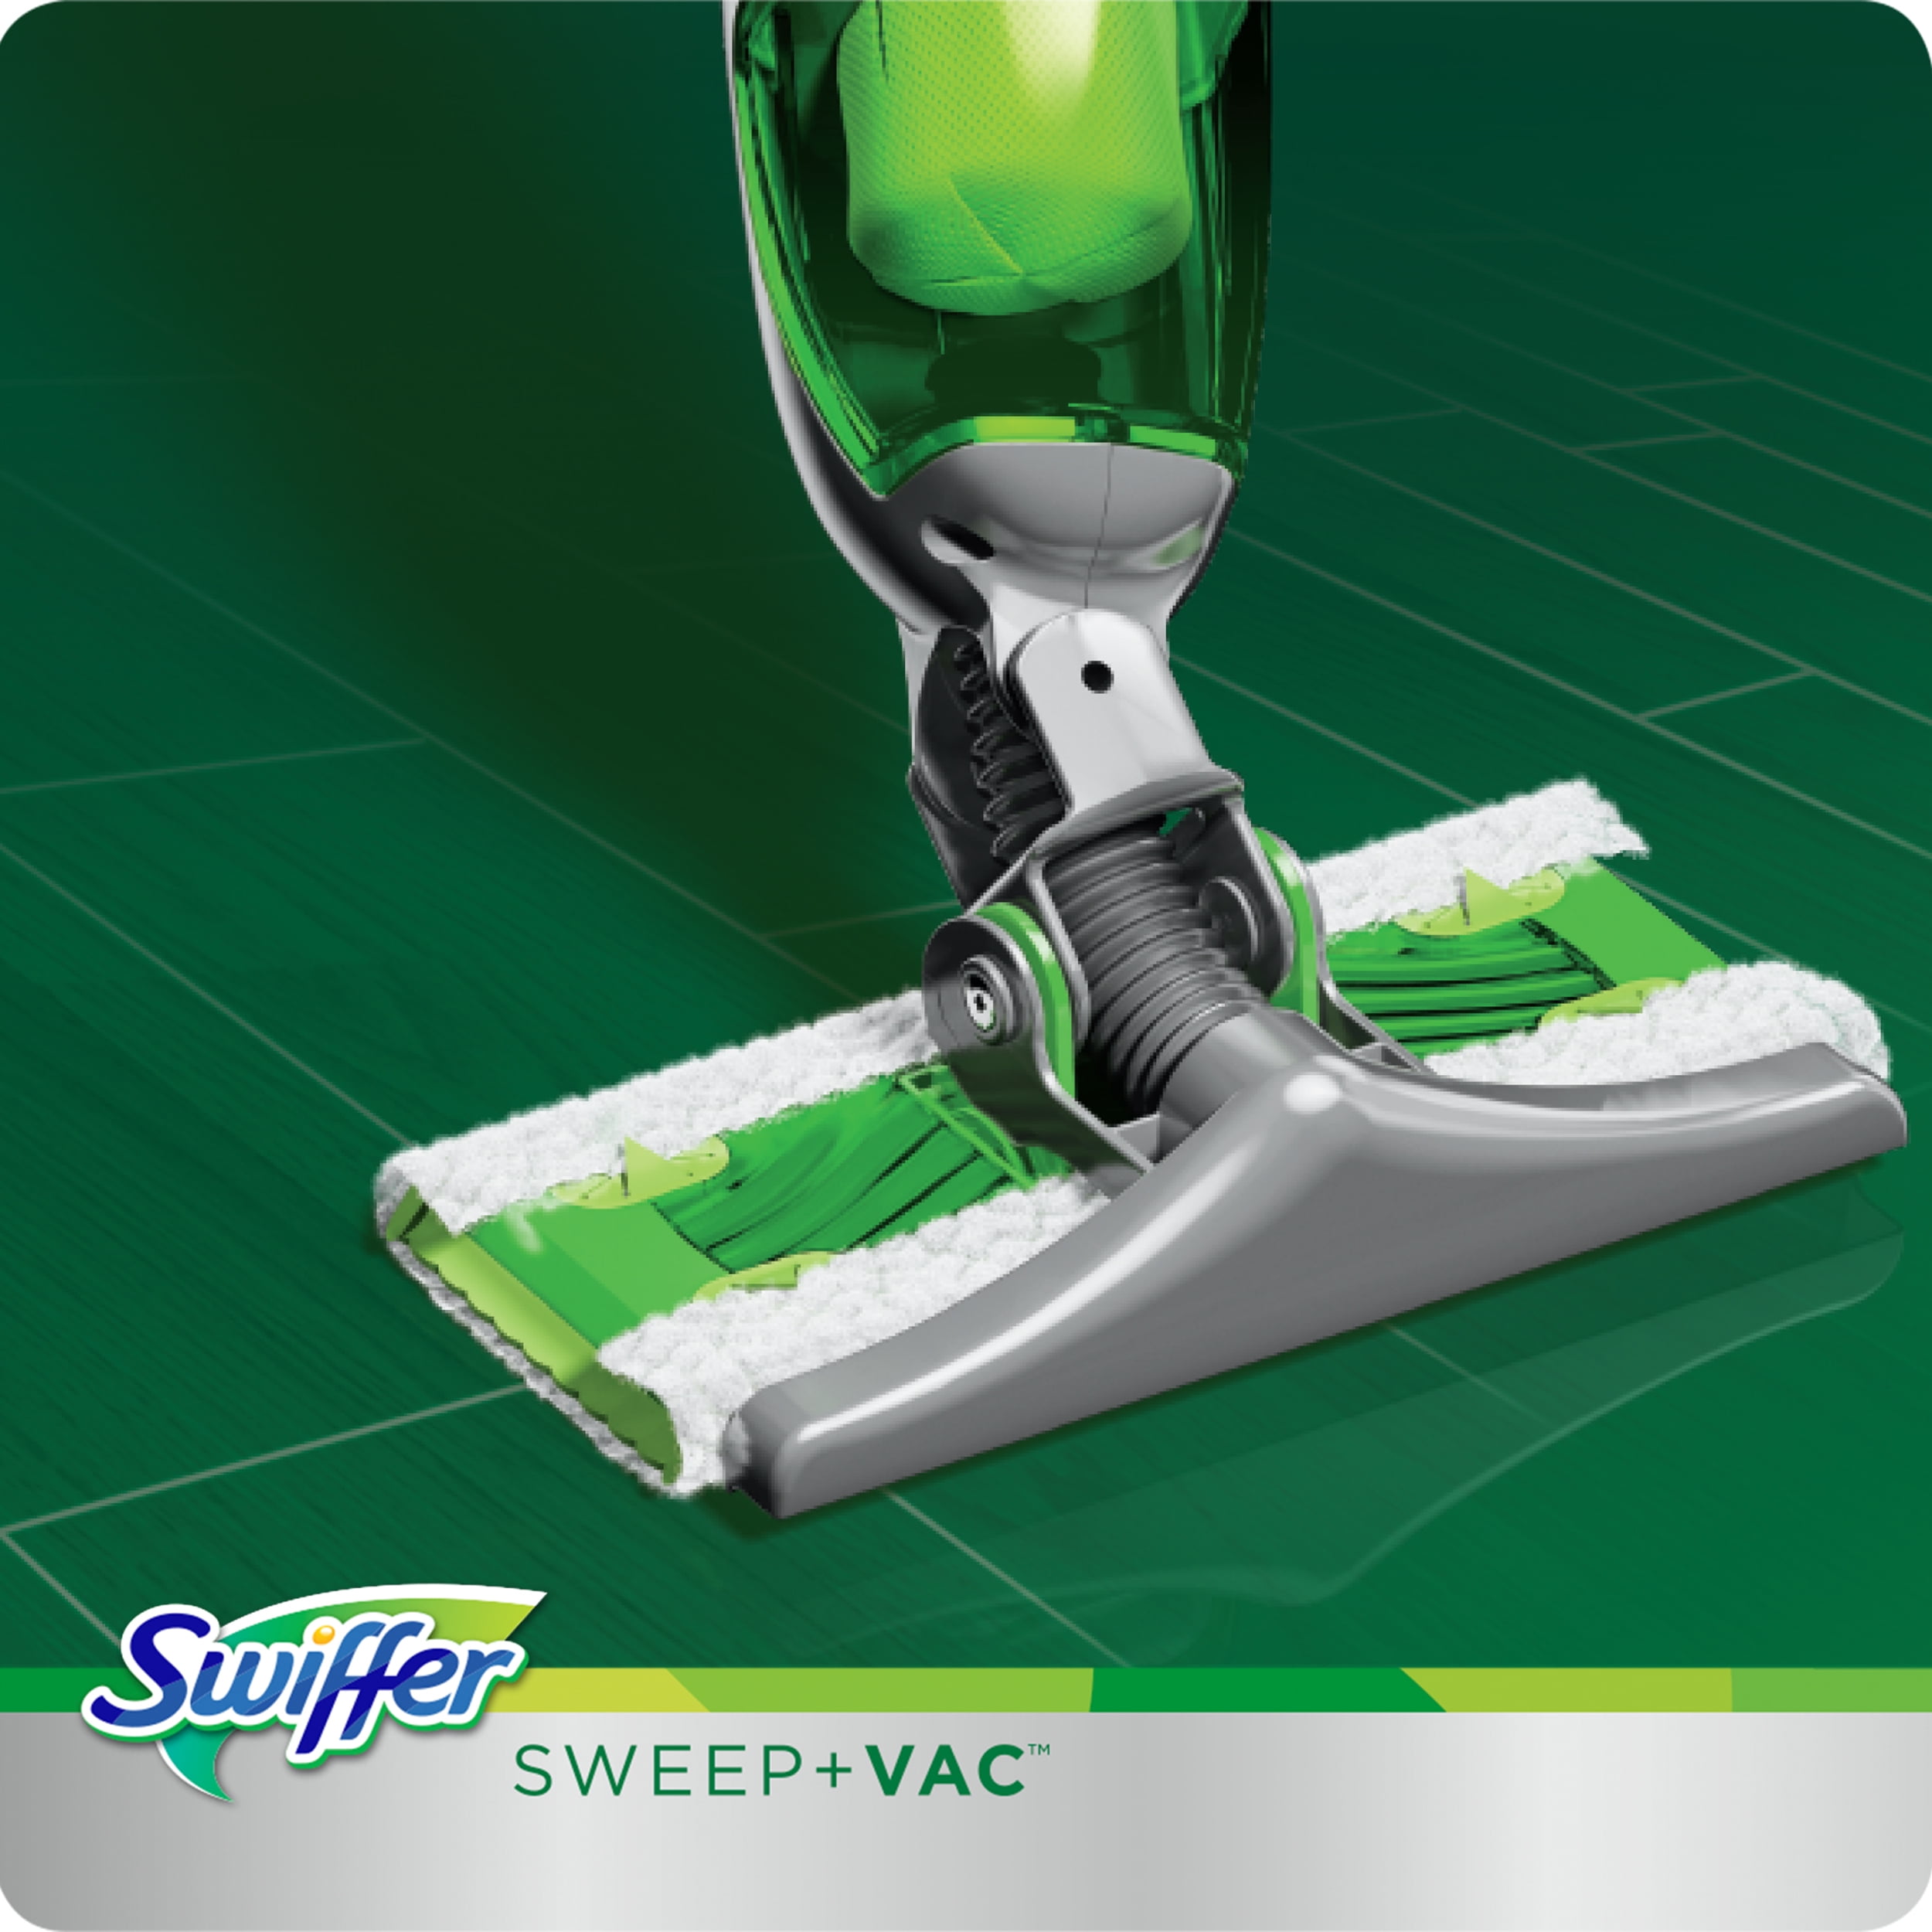 Swiffer + VAC Cordless Kit (1 Rechargeable Vacuum Sweeper, 8 Cloths, 1 Replaceable Filter, 1 Battery - Walmart.com